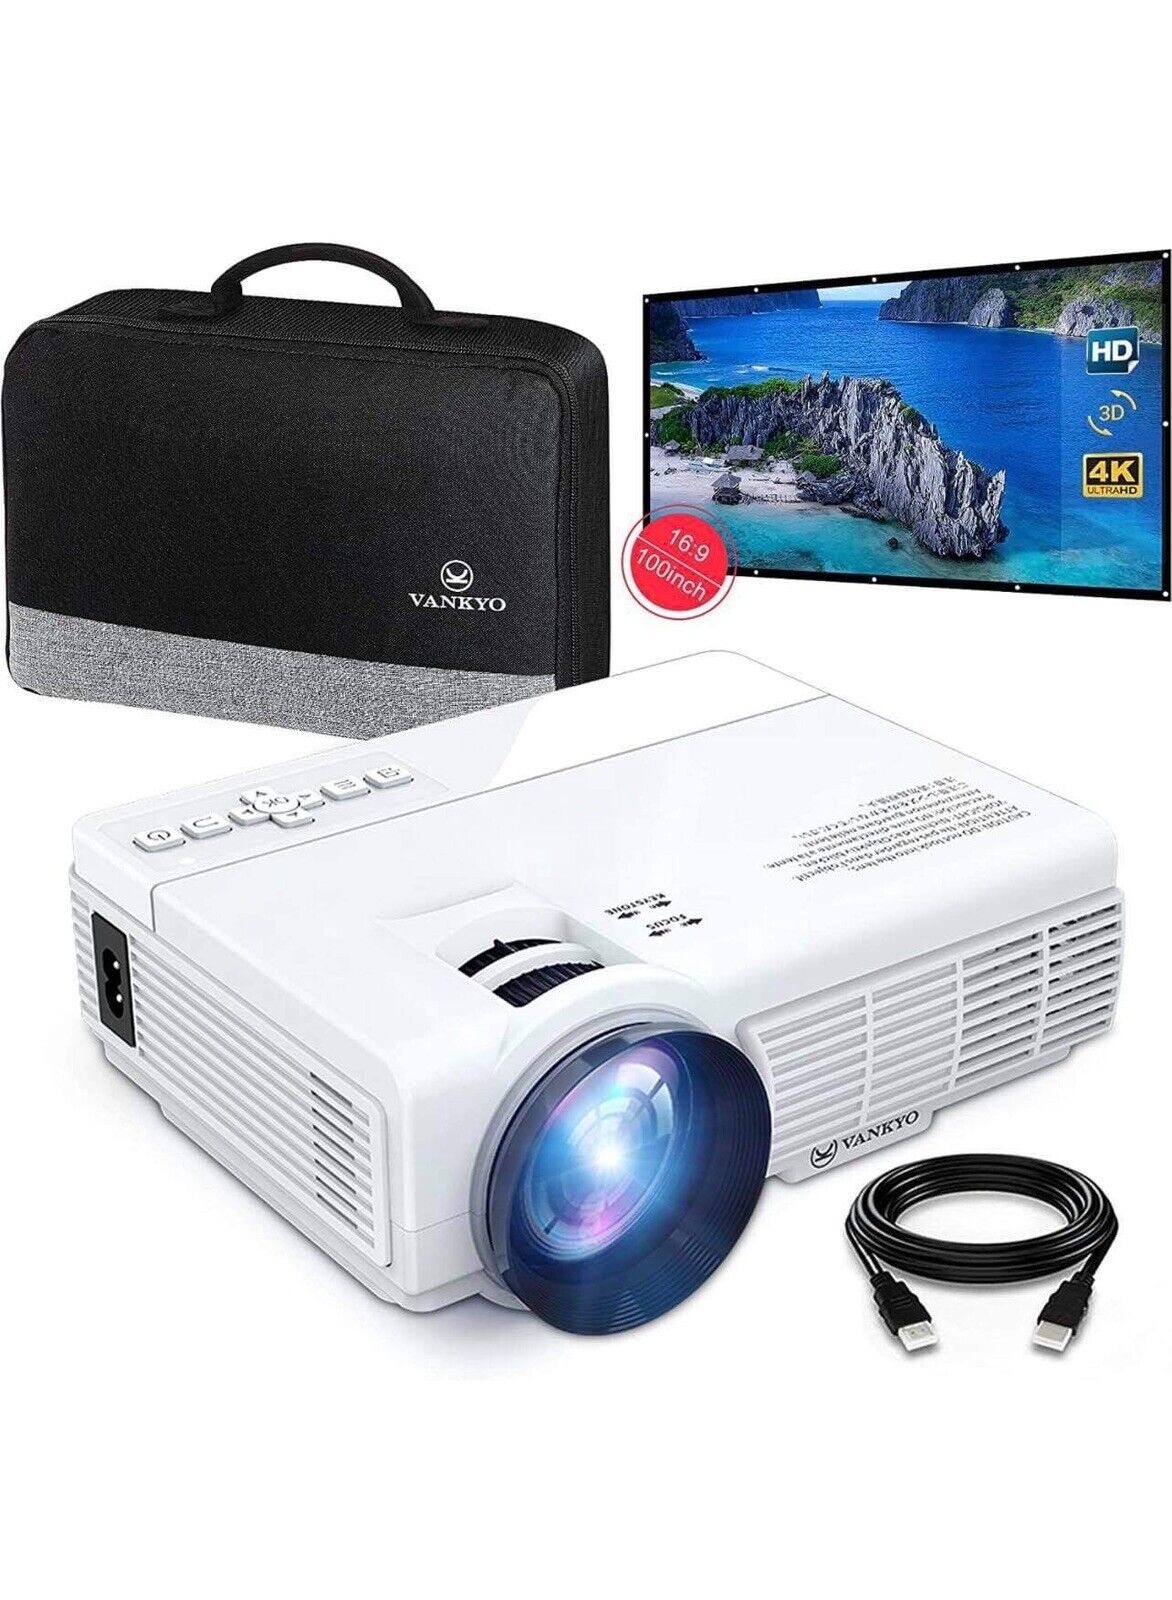 VANKYO Leisure 3 Upgraded Version 2400 Lux LED Portable Projector With Carrying